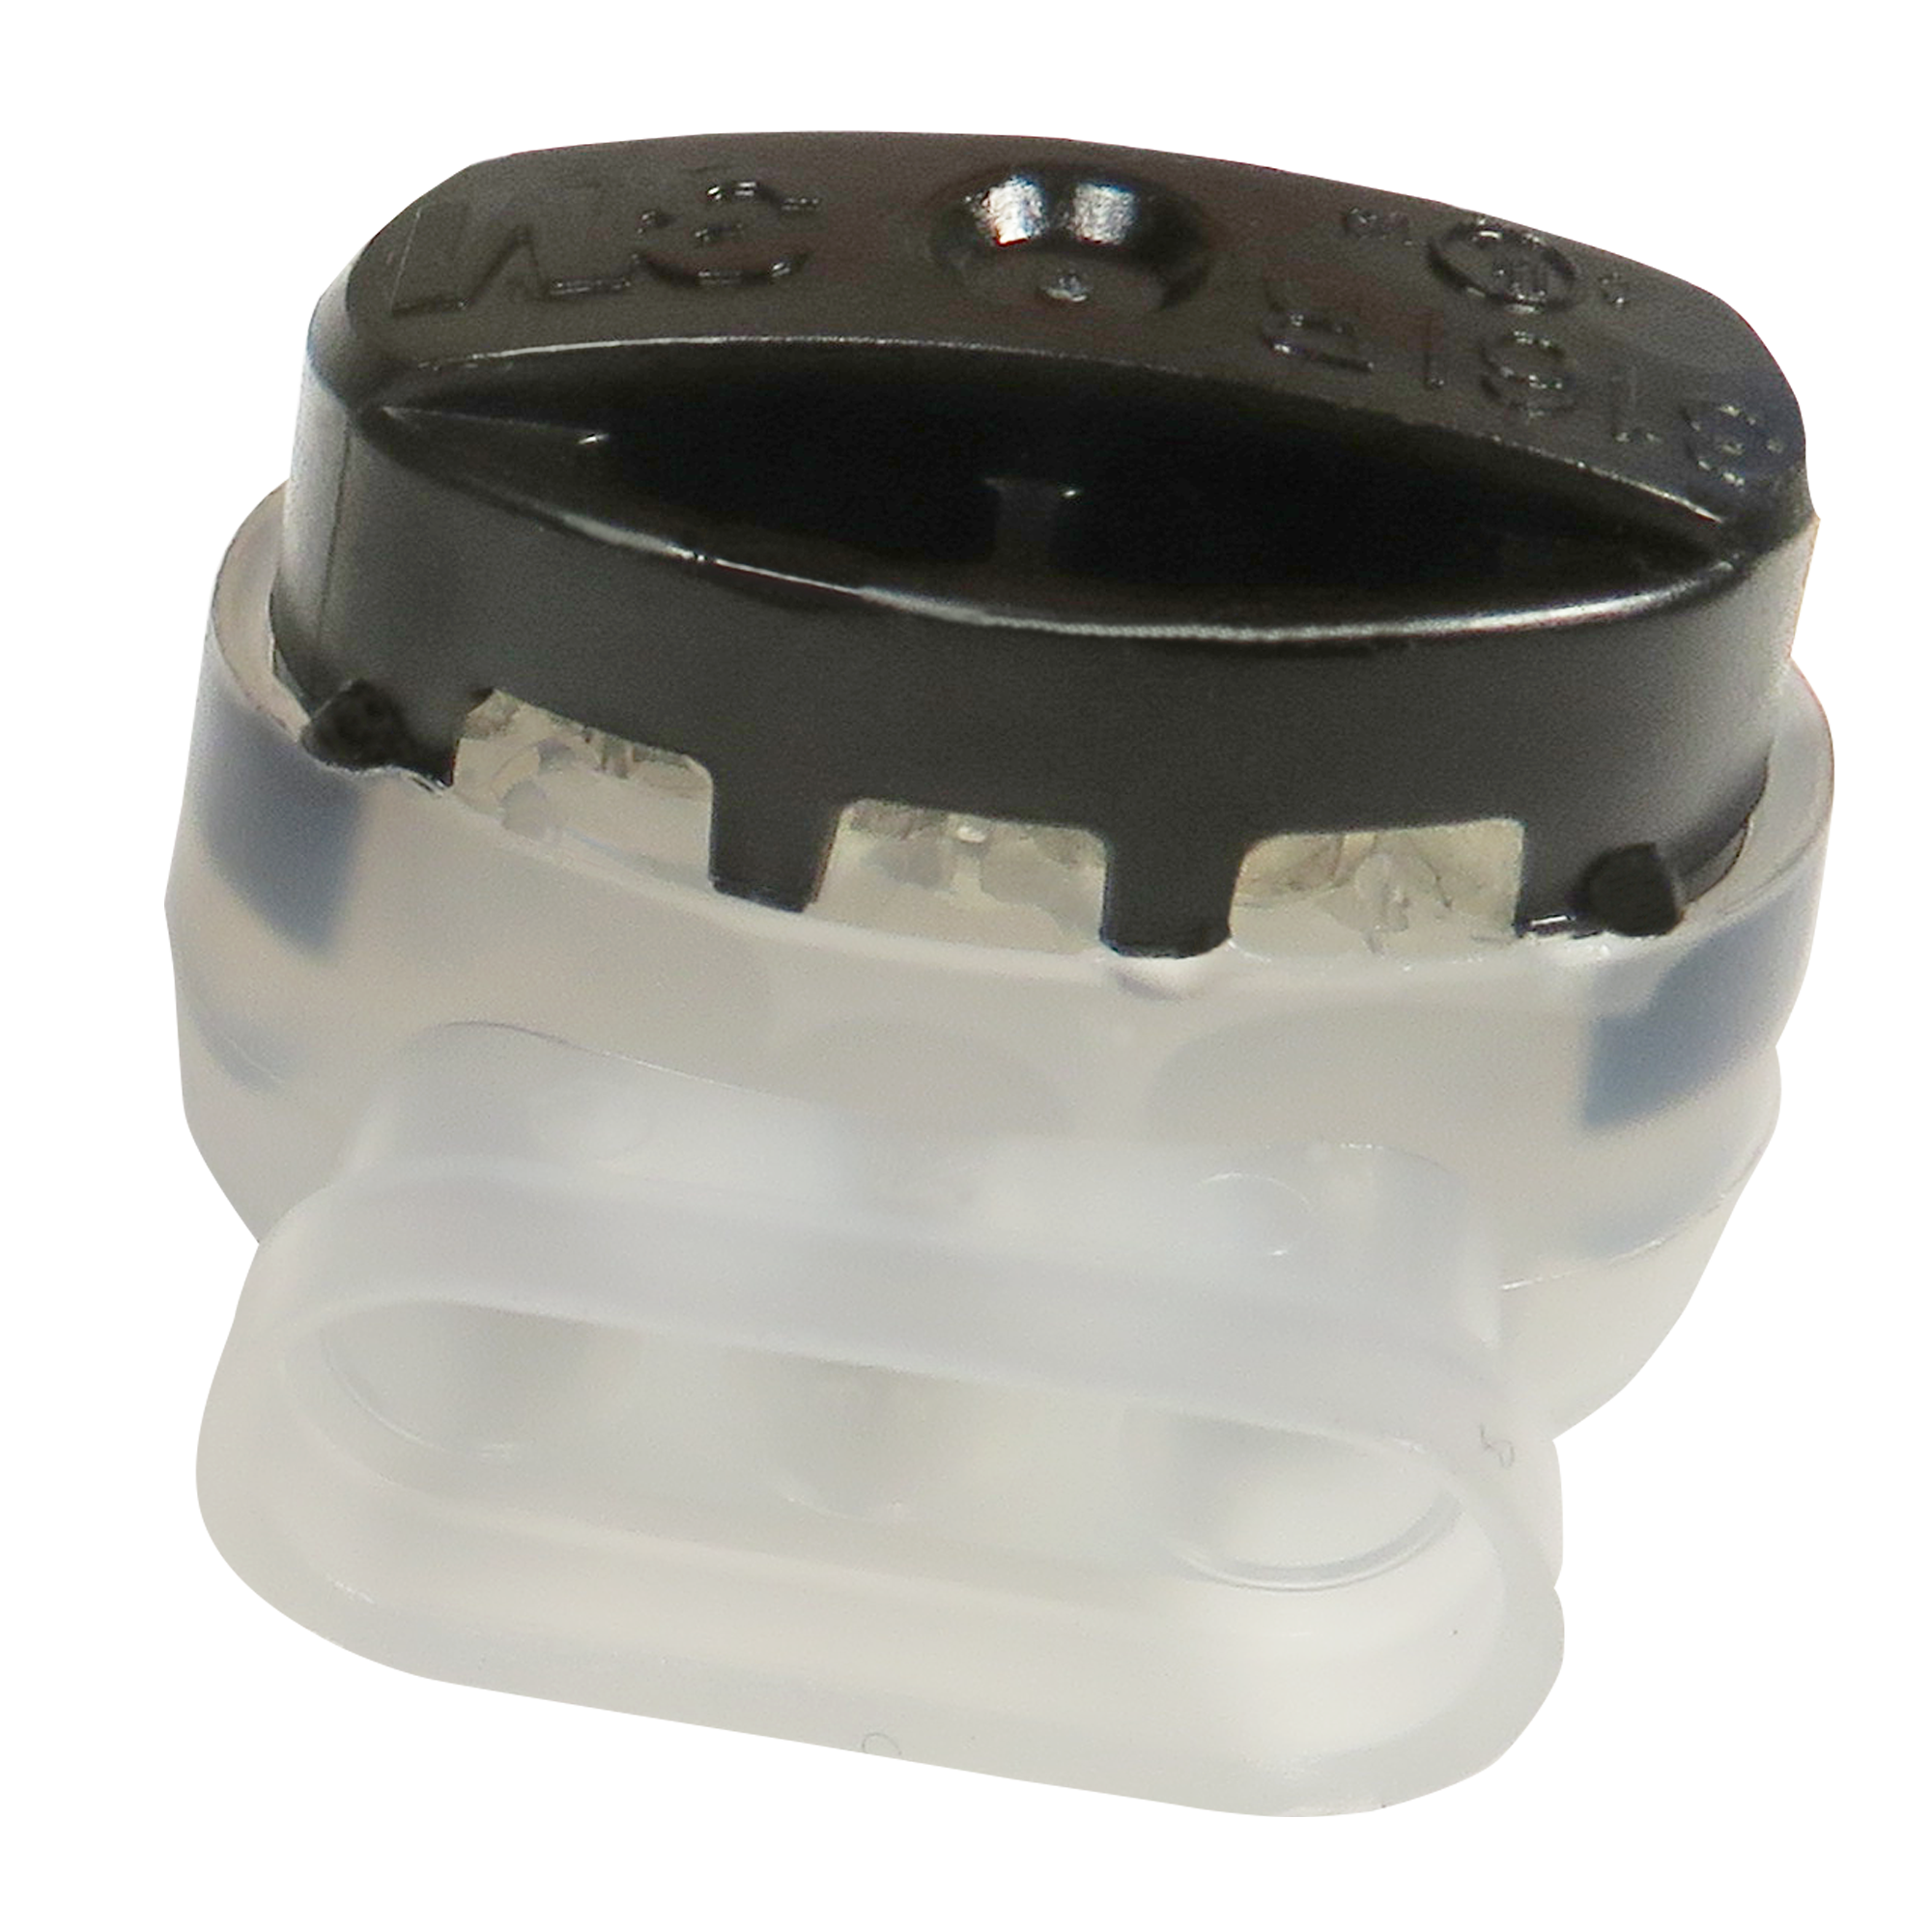 Suitable for applications requiring moisture and UV protection, the PinPoint connectors can electrically connect 2-3 wire ends. They can accommodate 22-14 AWG.